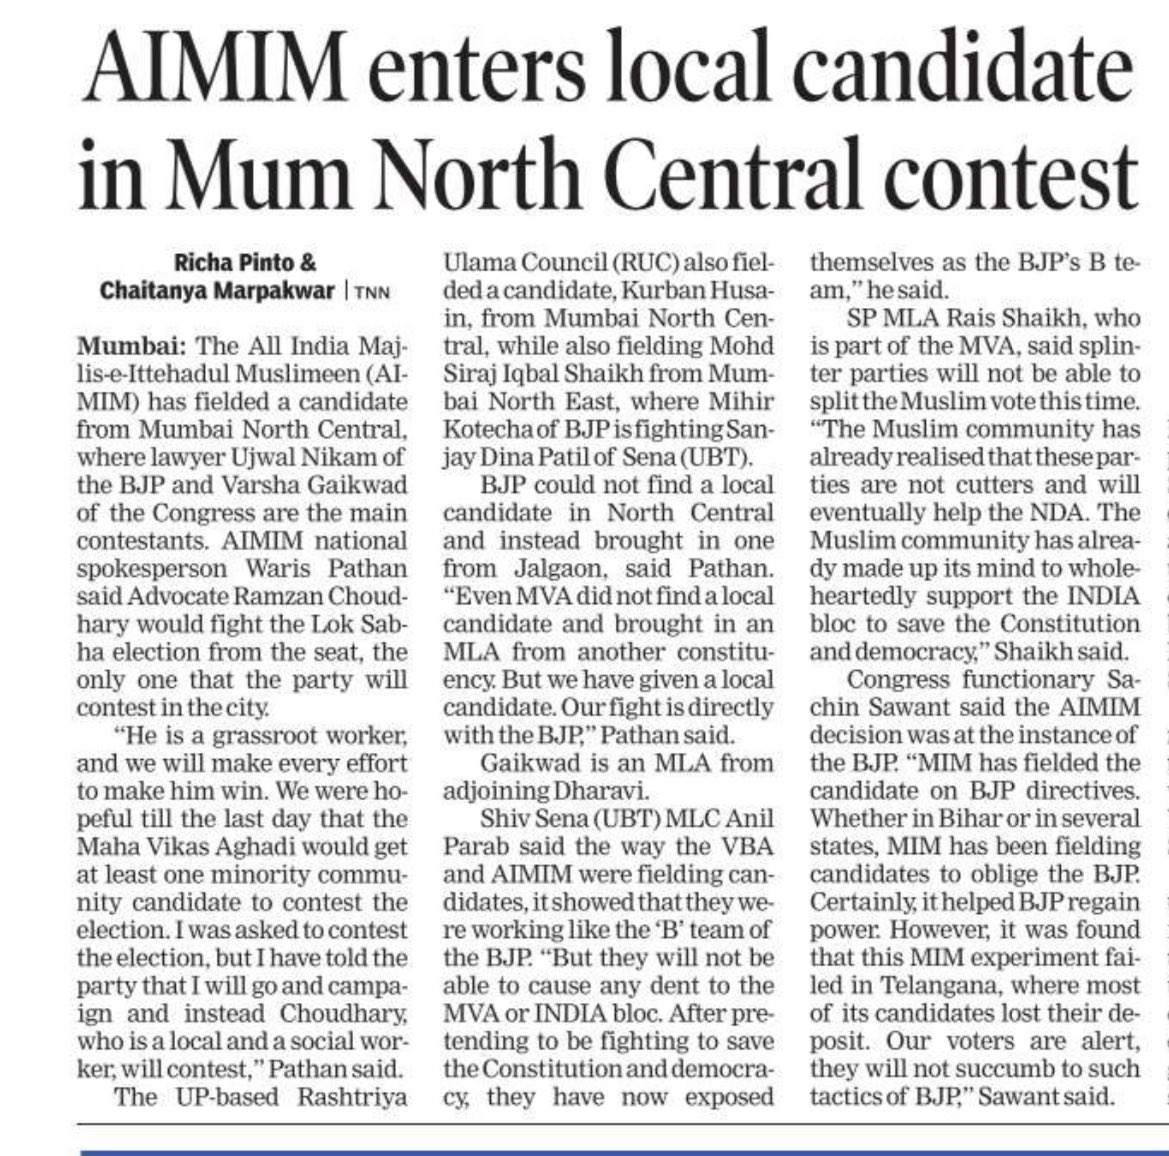 The @aimim_national will contest only on one seat from Mumbai which is the Mumbai North Central where Congress Varsha Gaikwad & BJP’s Ujwal Nikam are in fray. timesofindia.indiatimes.com/city/mumbai/ai…